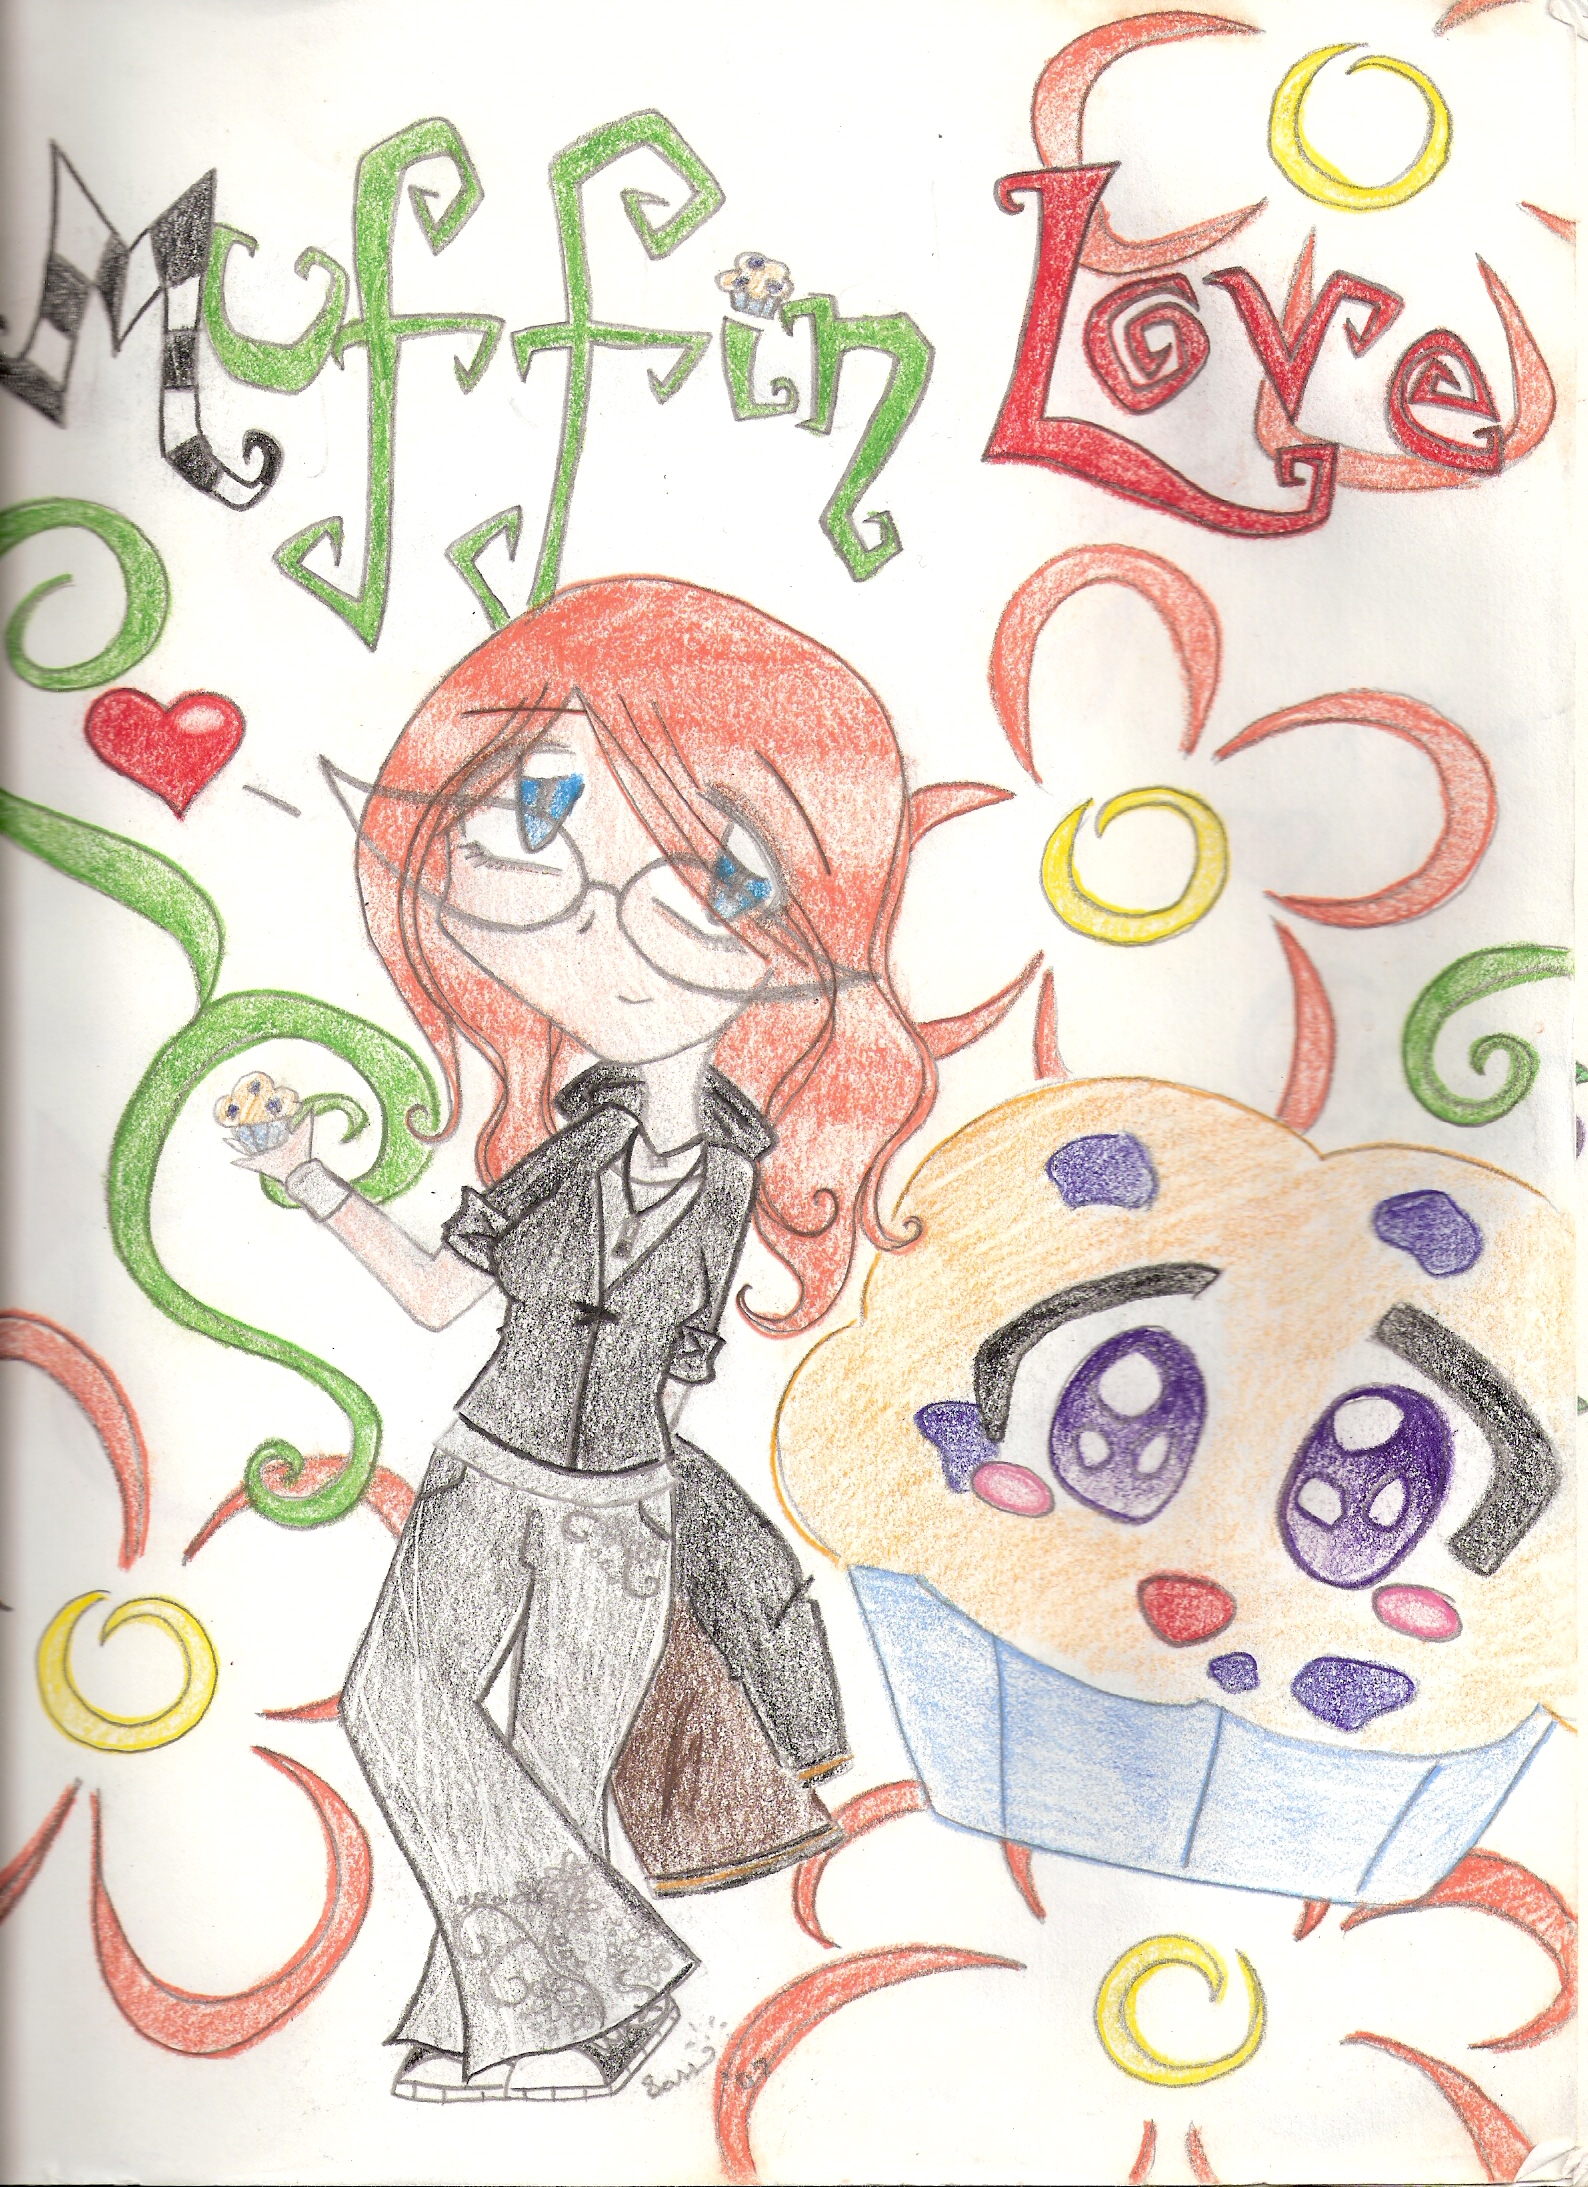 German Doodles: Muffin Love by supergirlcomix